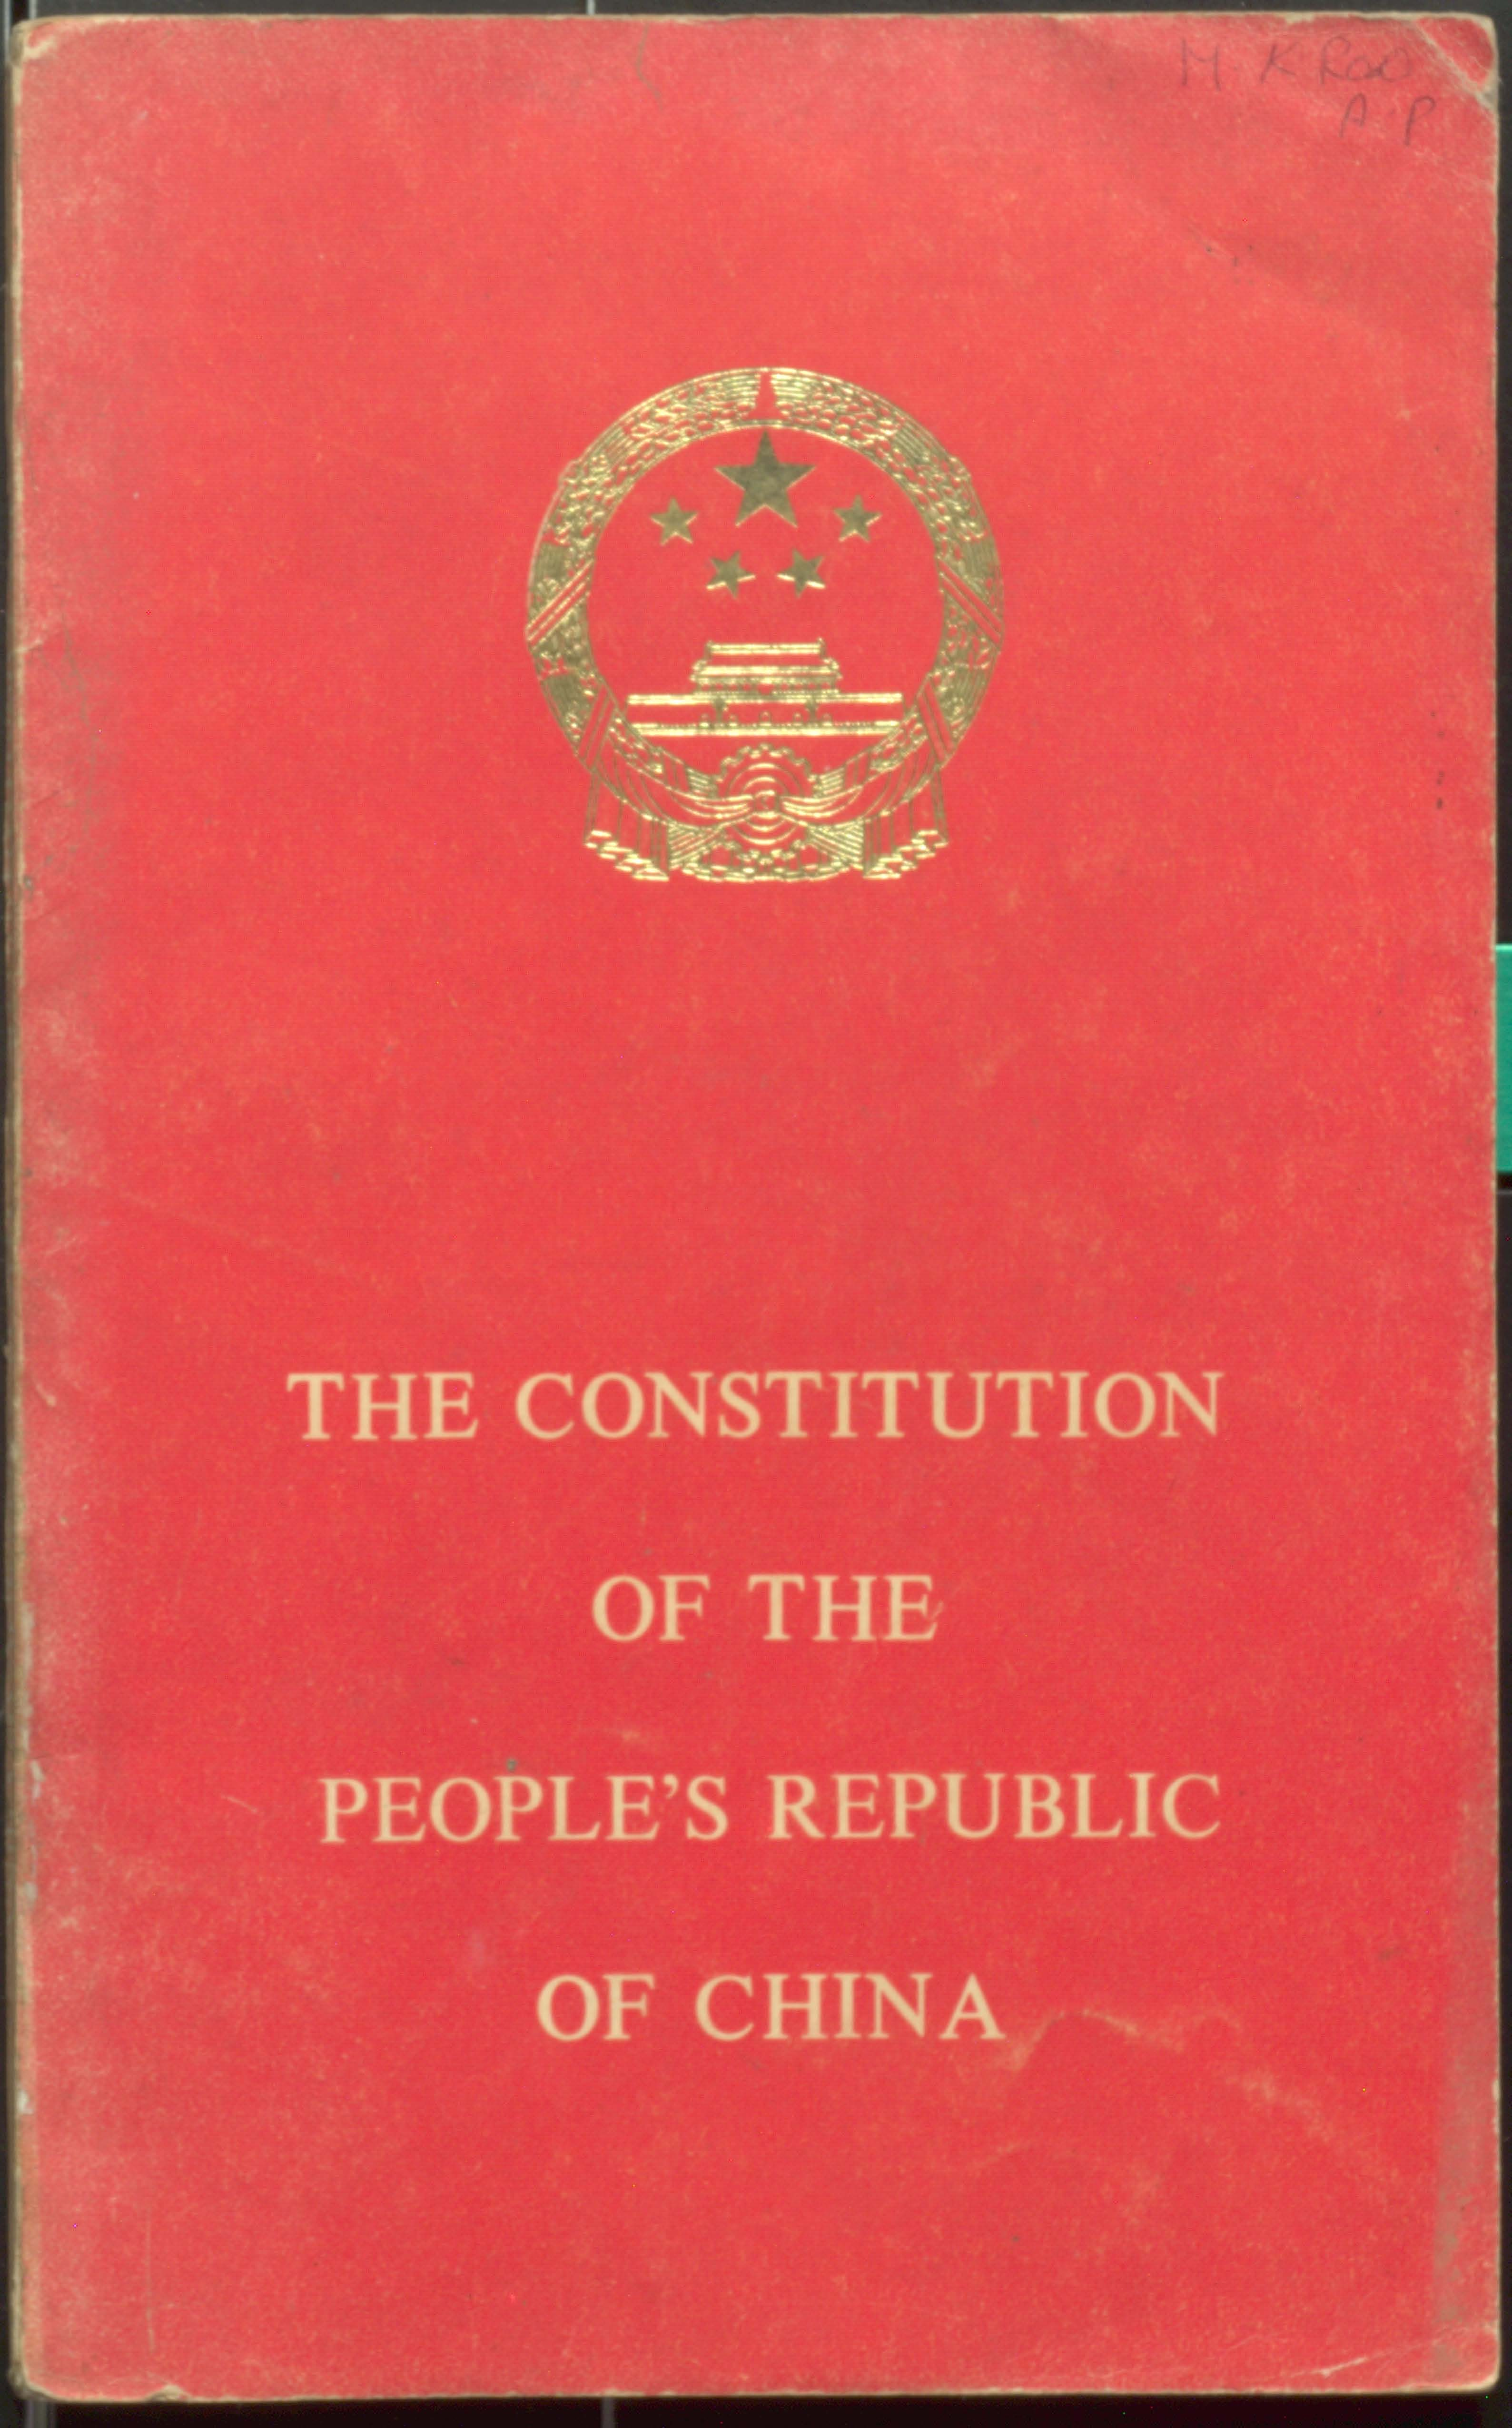 The Constitution Of The People's Republic Of China